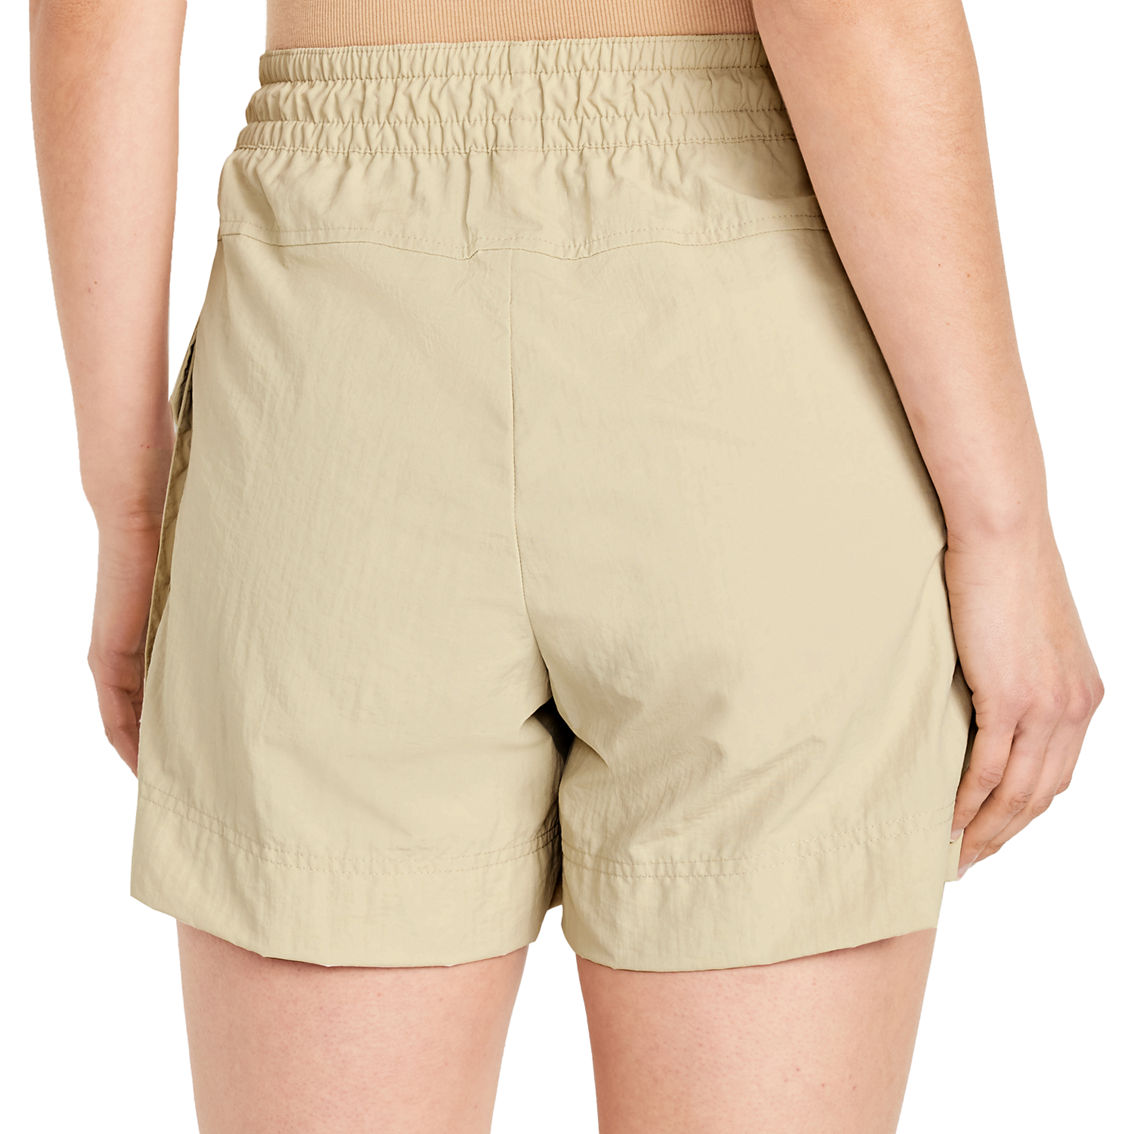 Old Navy Woven Cargo Shorts - Image 2 of 3